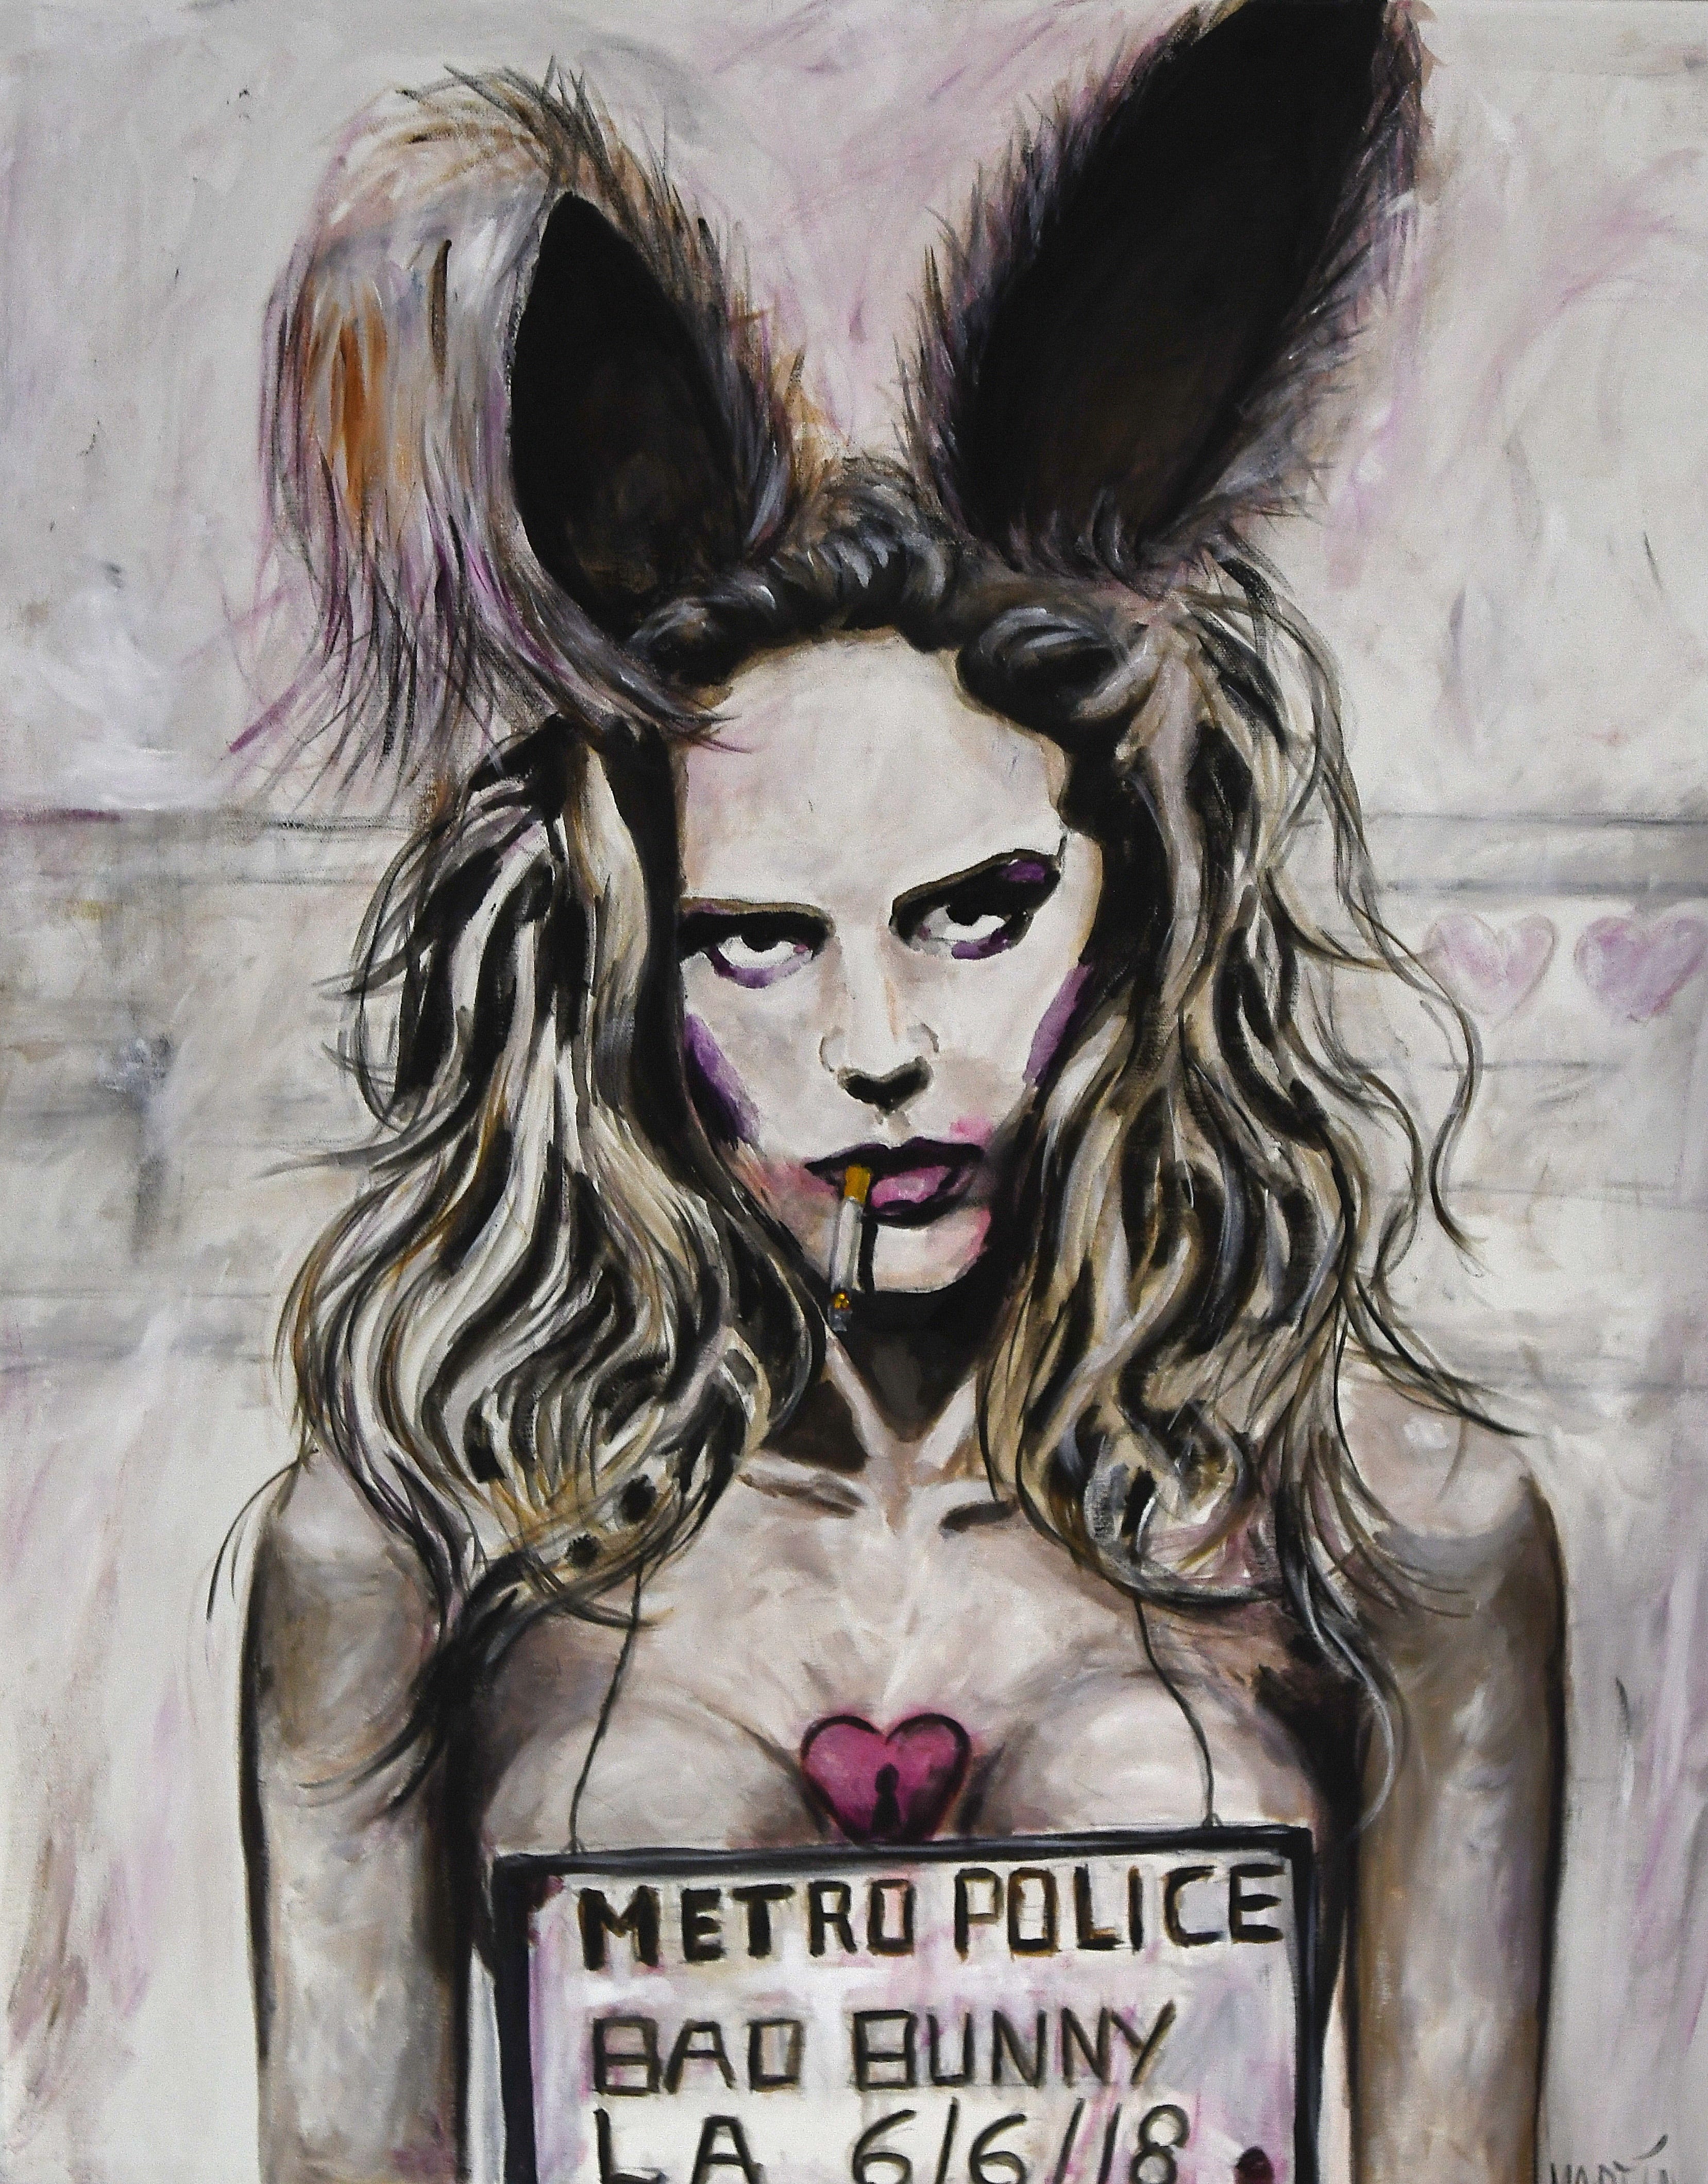 Dirty Show entry 'Bad Bunny' by artist Peter Martin of Austria.